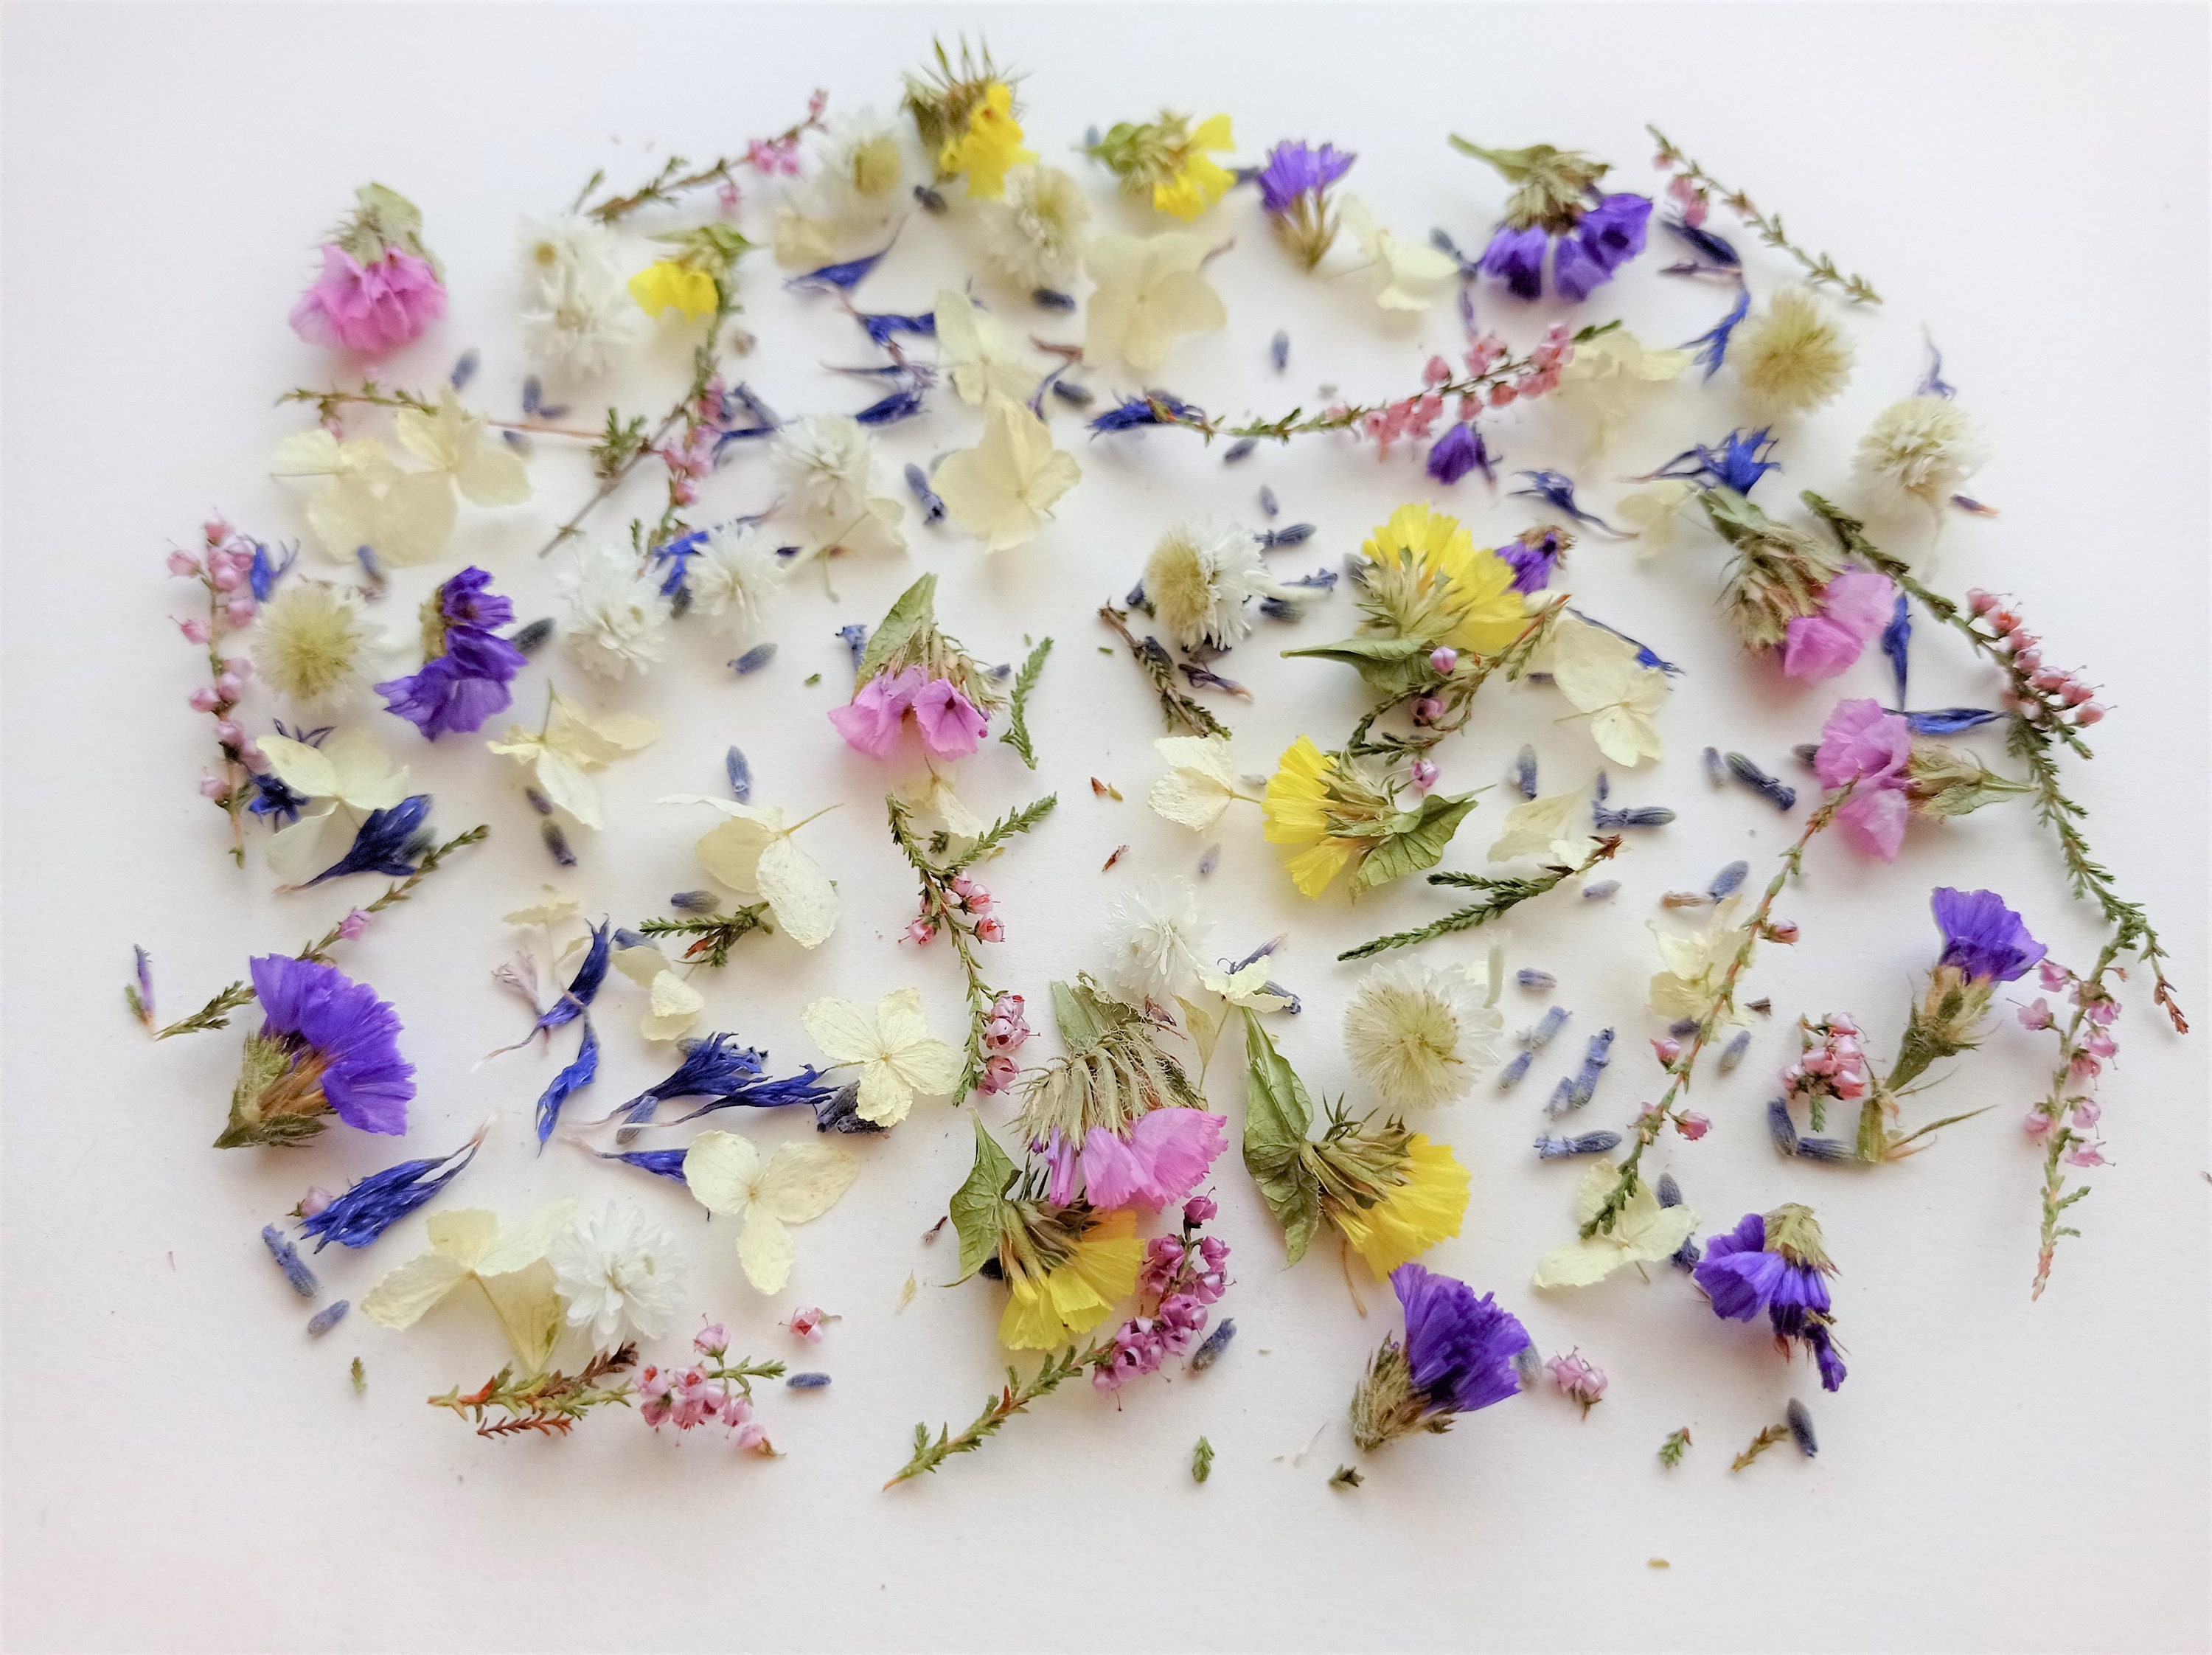 50 Pcs Small Dried Flowers,tiny Dry Flowers,flowers for Resin,box Resin  DIY, Dry Flower Supply, Dried Flowers Kit, Dried Flowers for Crafts 